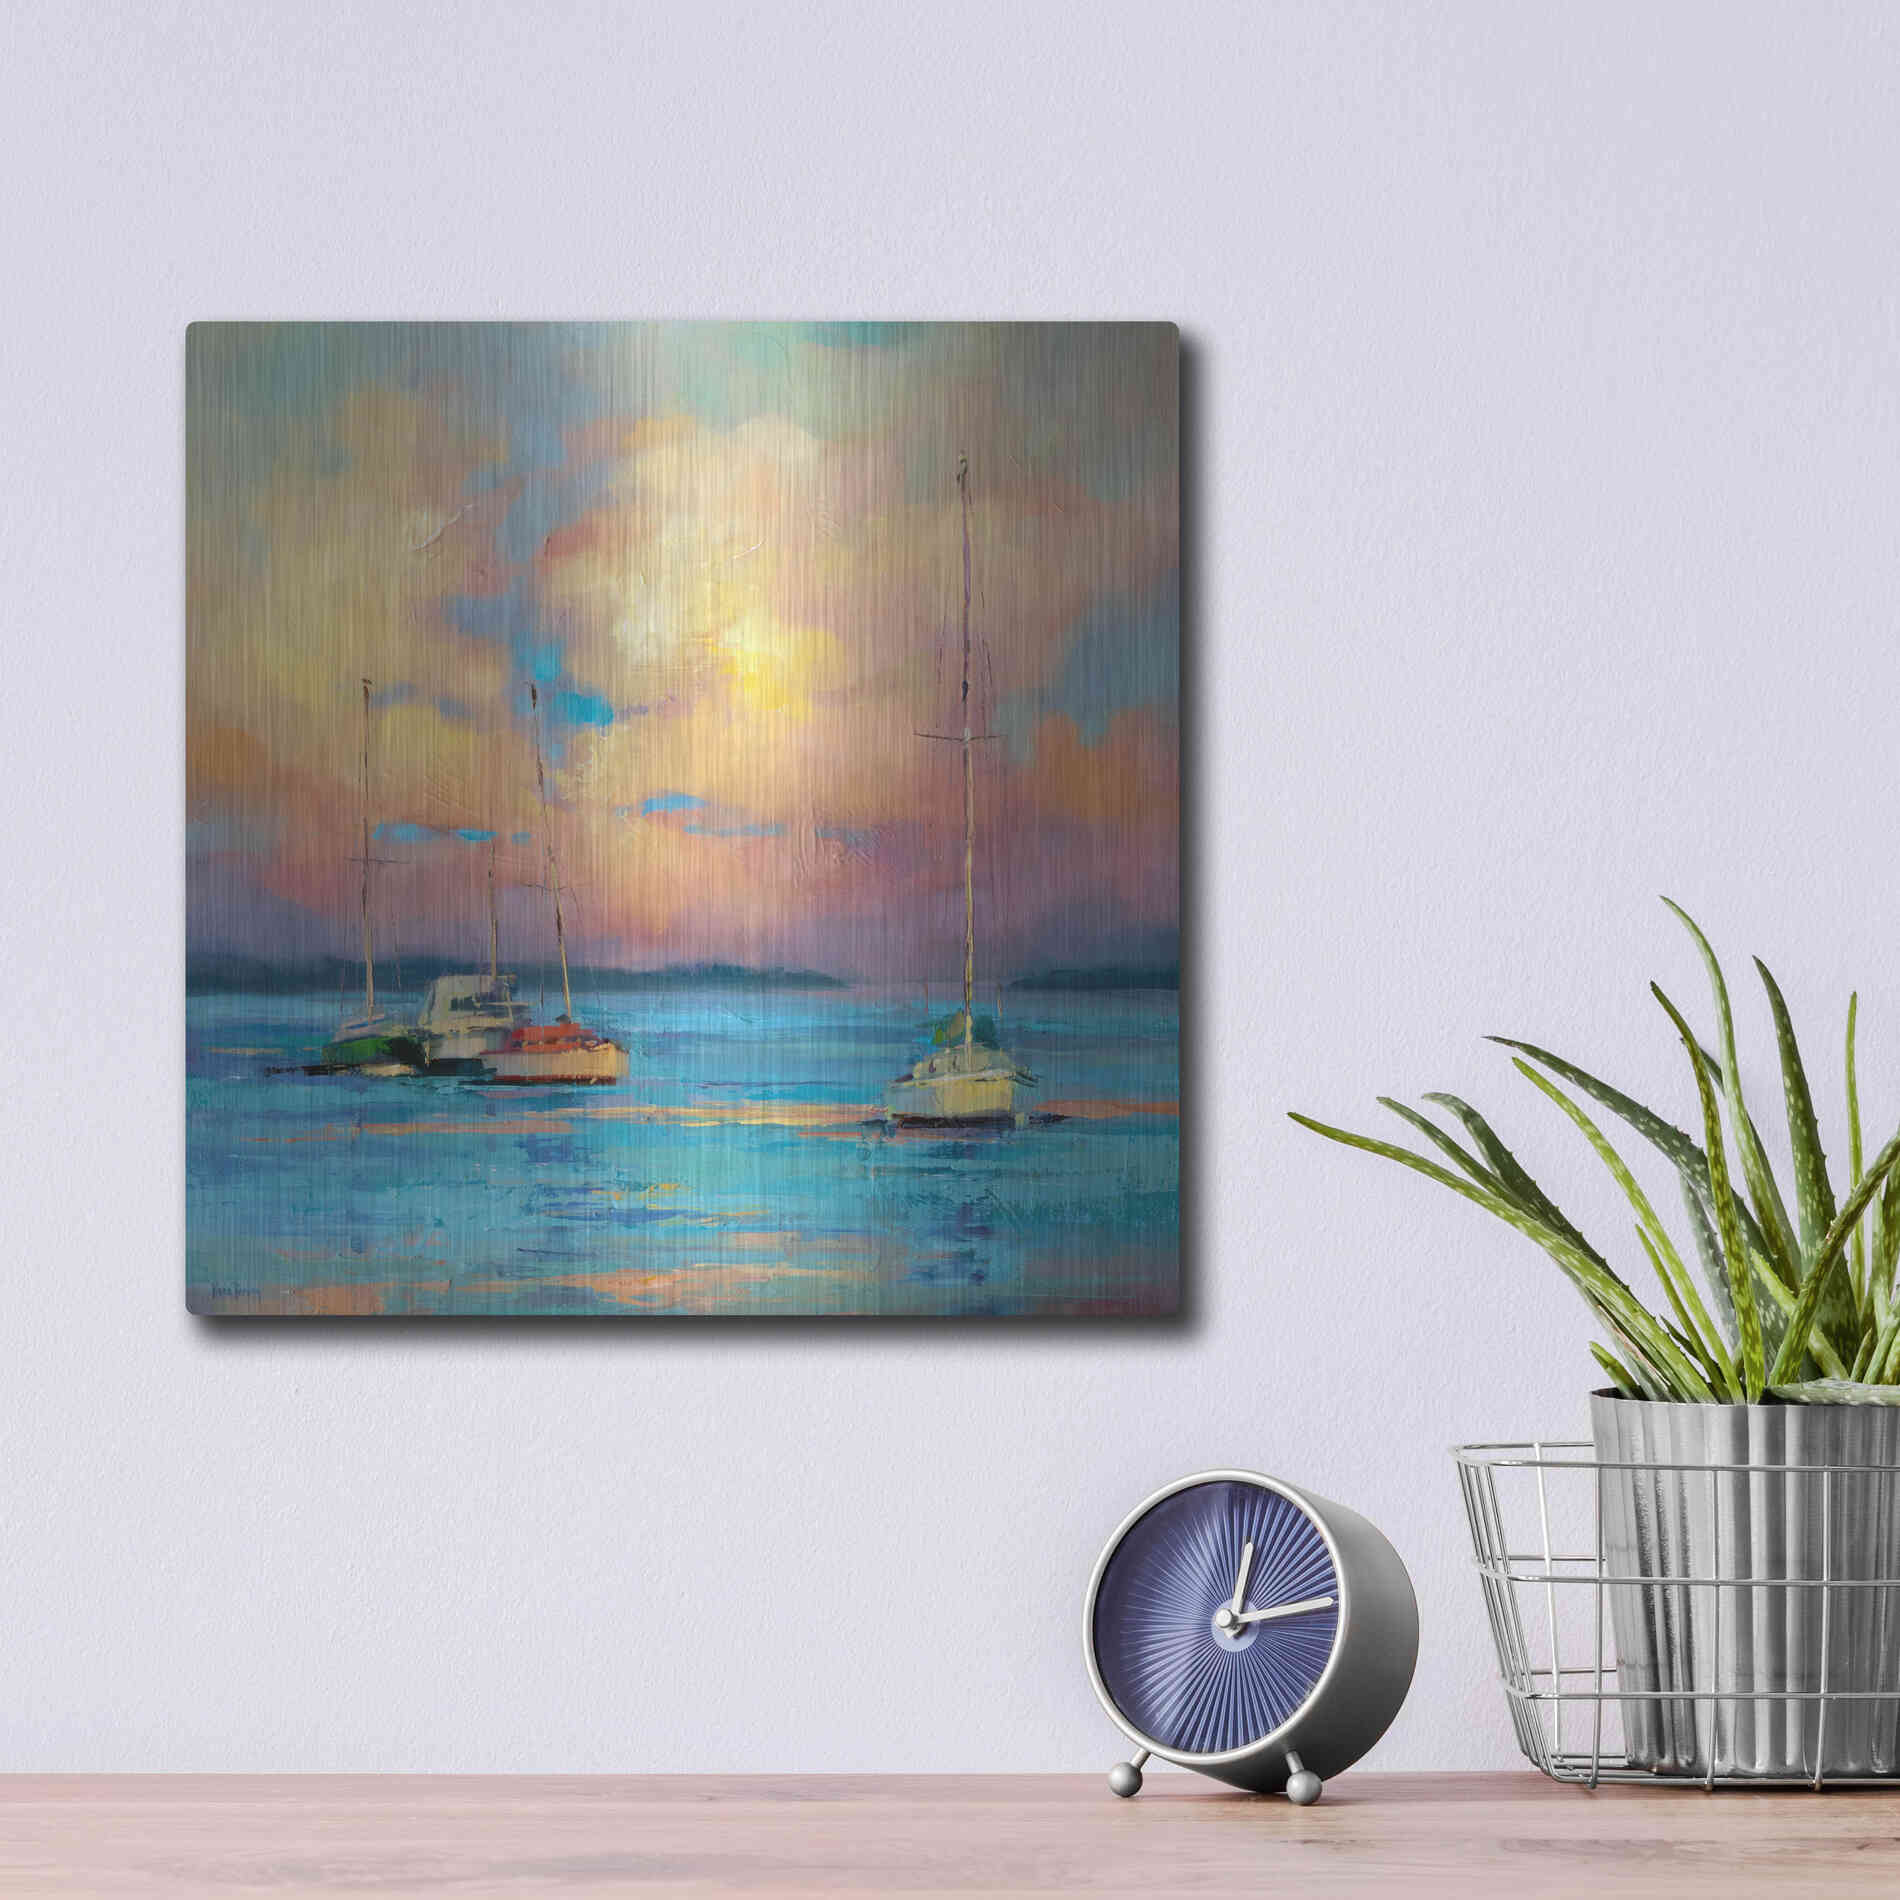 Luxe Metal Art 'After The Sailing Day' by Kasia Bruniany Metal Wall Art,12x12